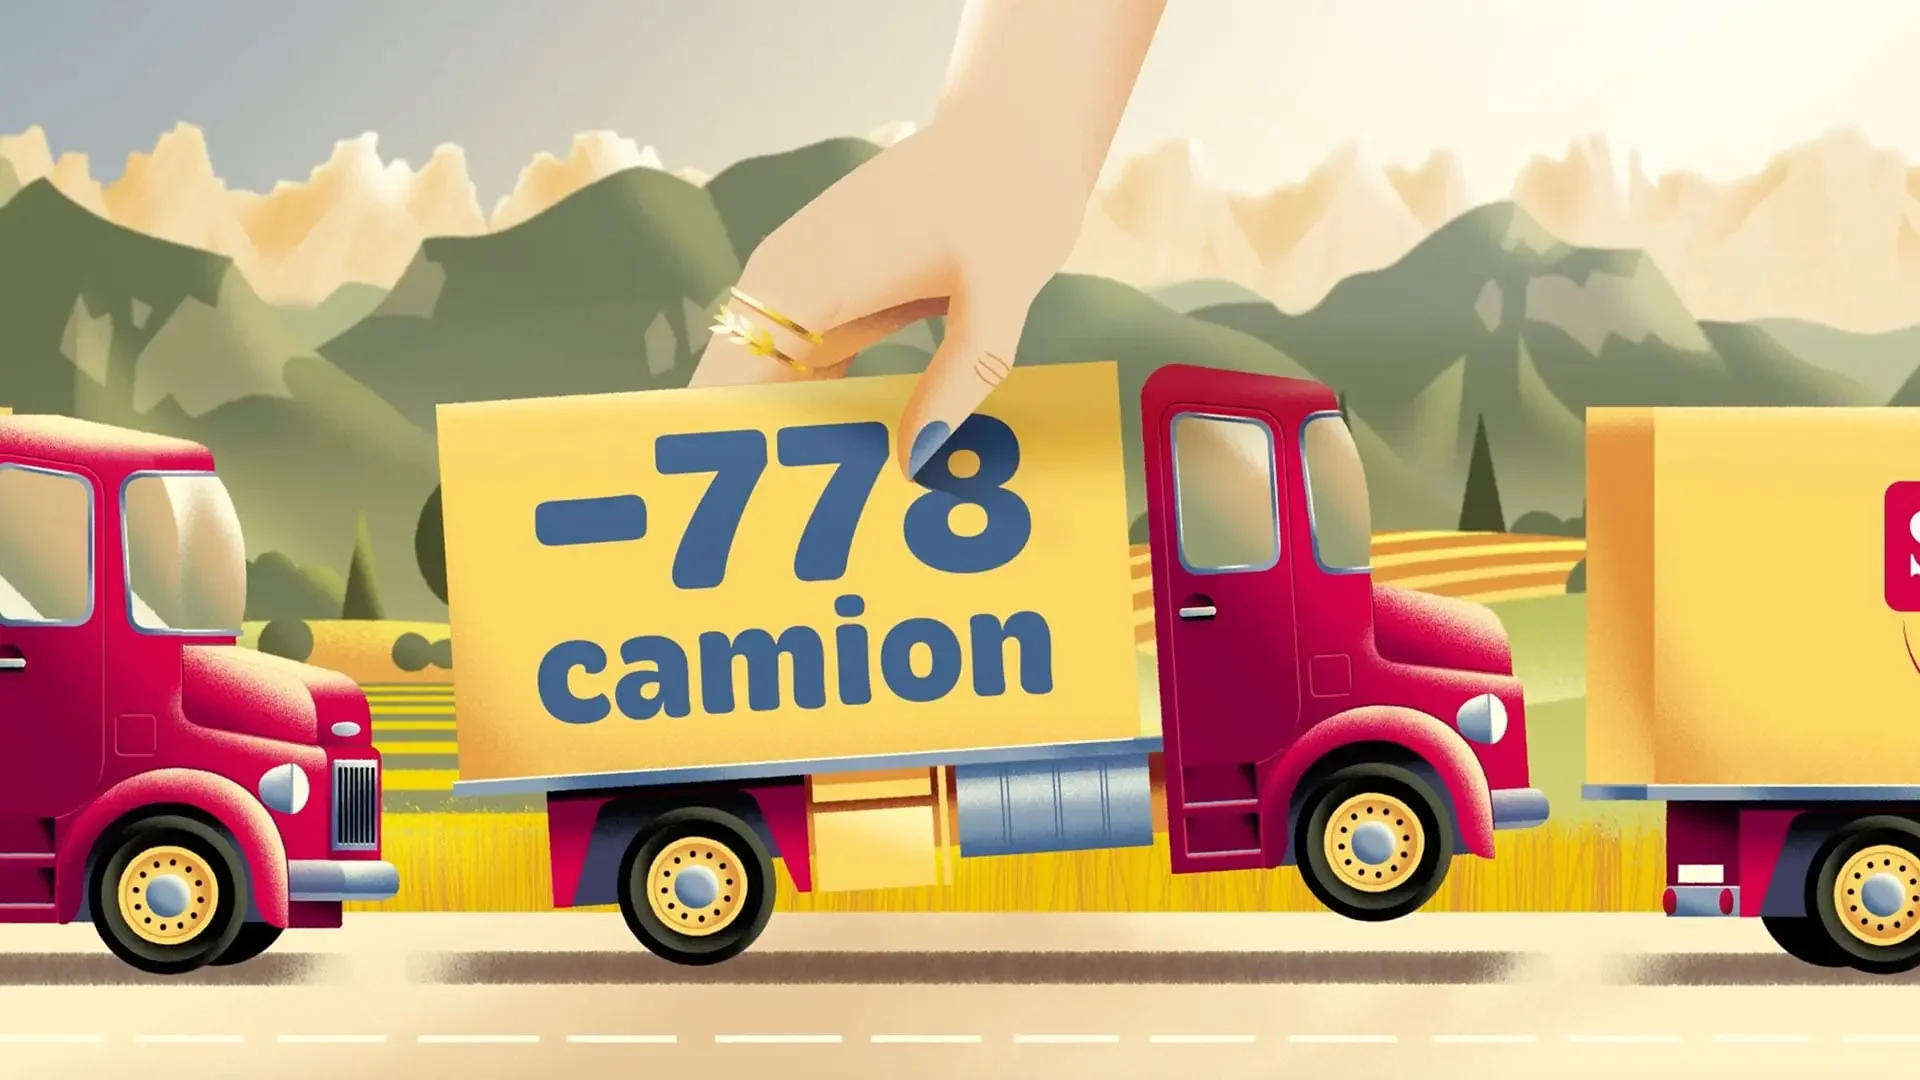 -778 camion